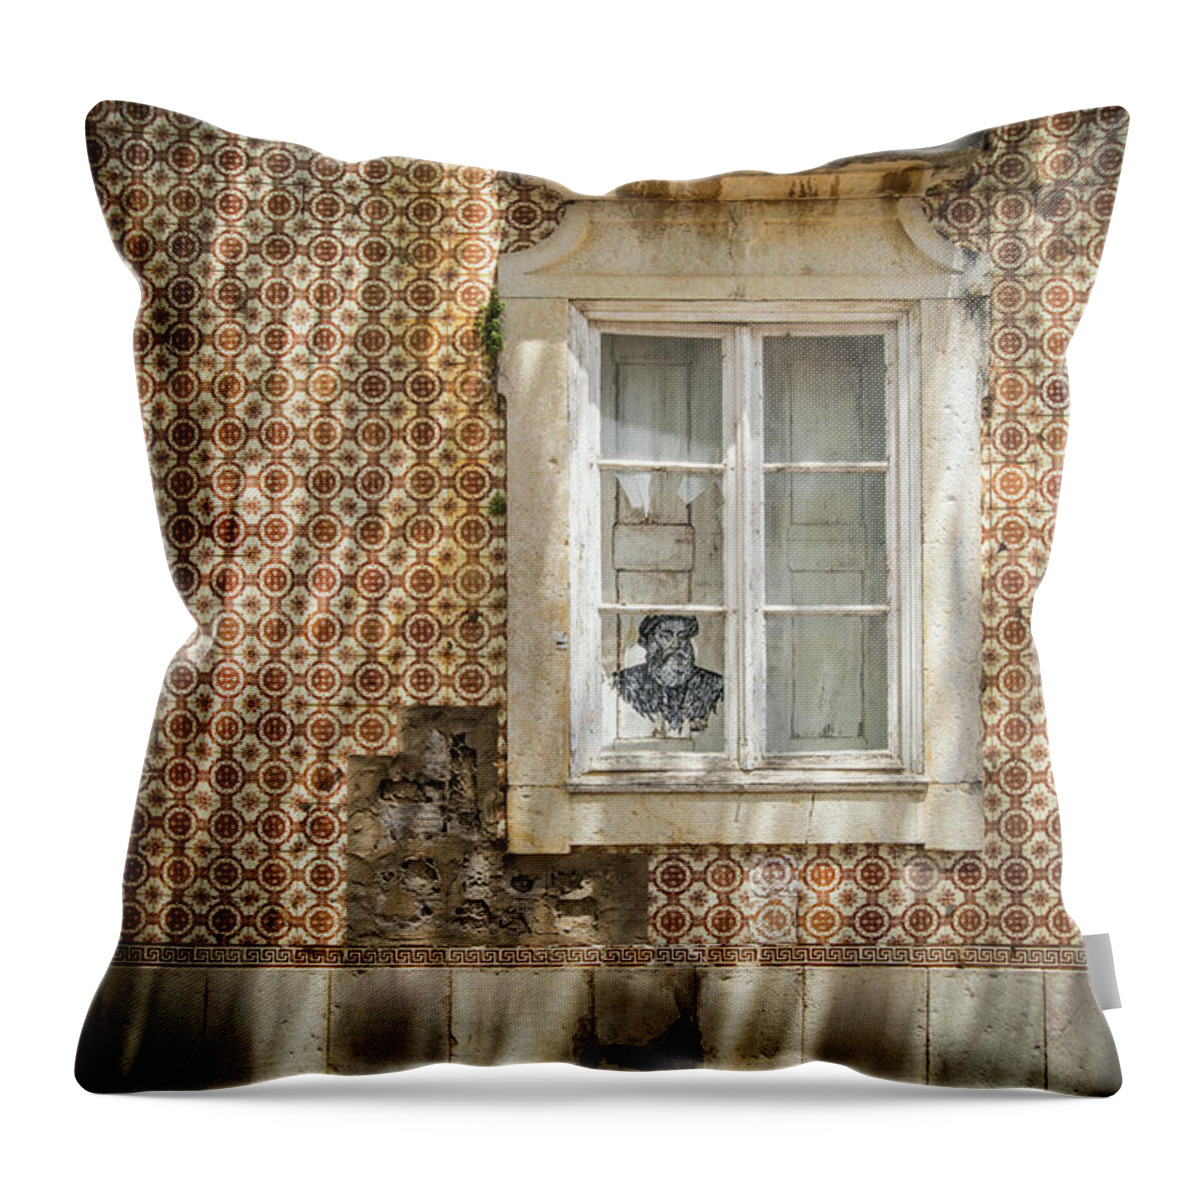 Faro Throw Pillow featuring the photograph Faro Window by Nigel R Bell